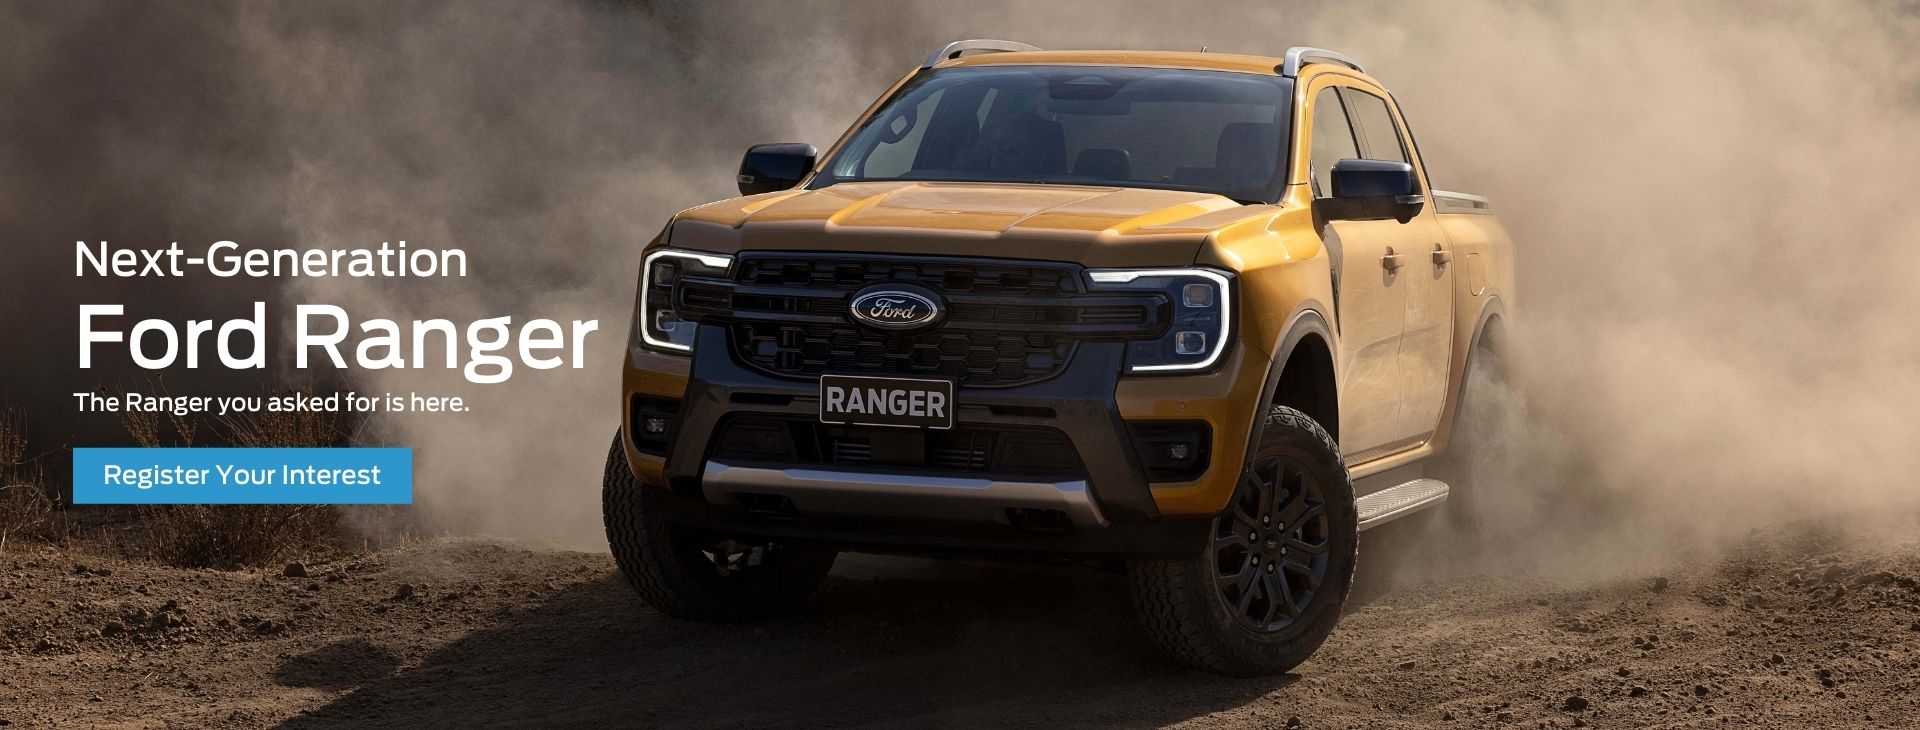 The Ranger you asked for is here.